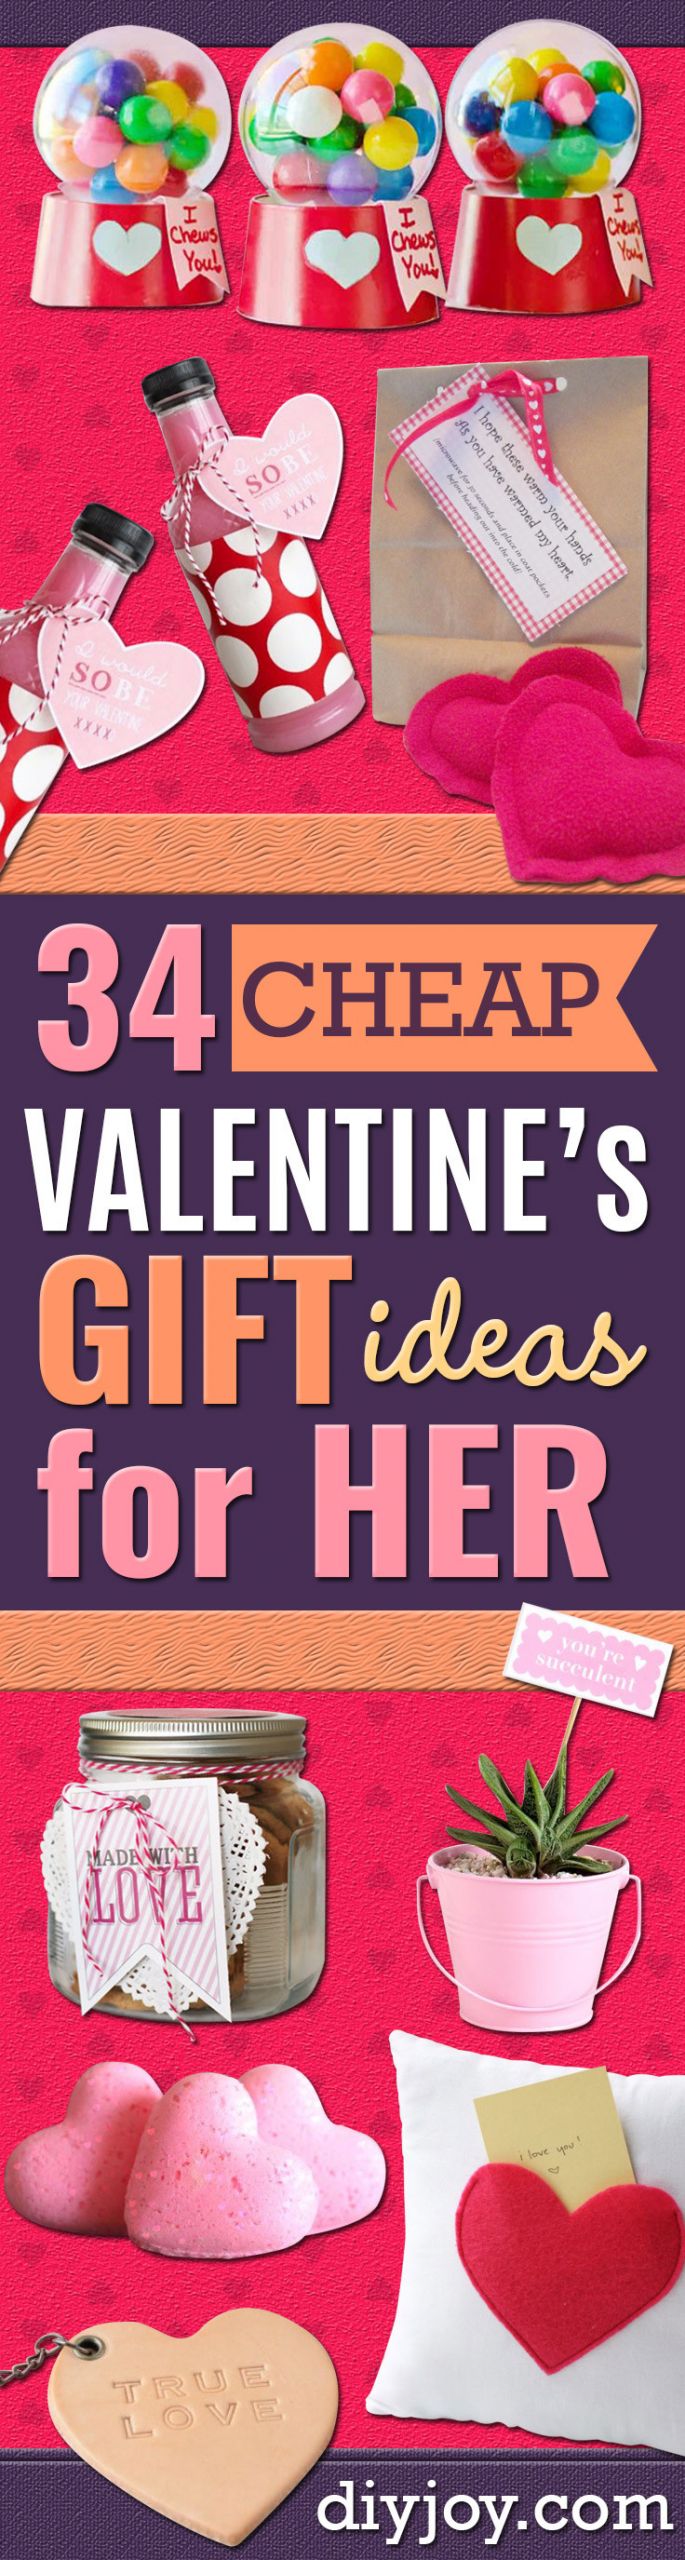 Valentine Gift Ideas For Her Malaysia
 34 Cheap Valentine s Gift Ideas for Her